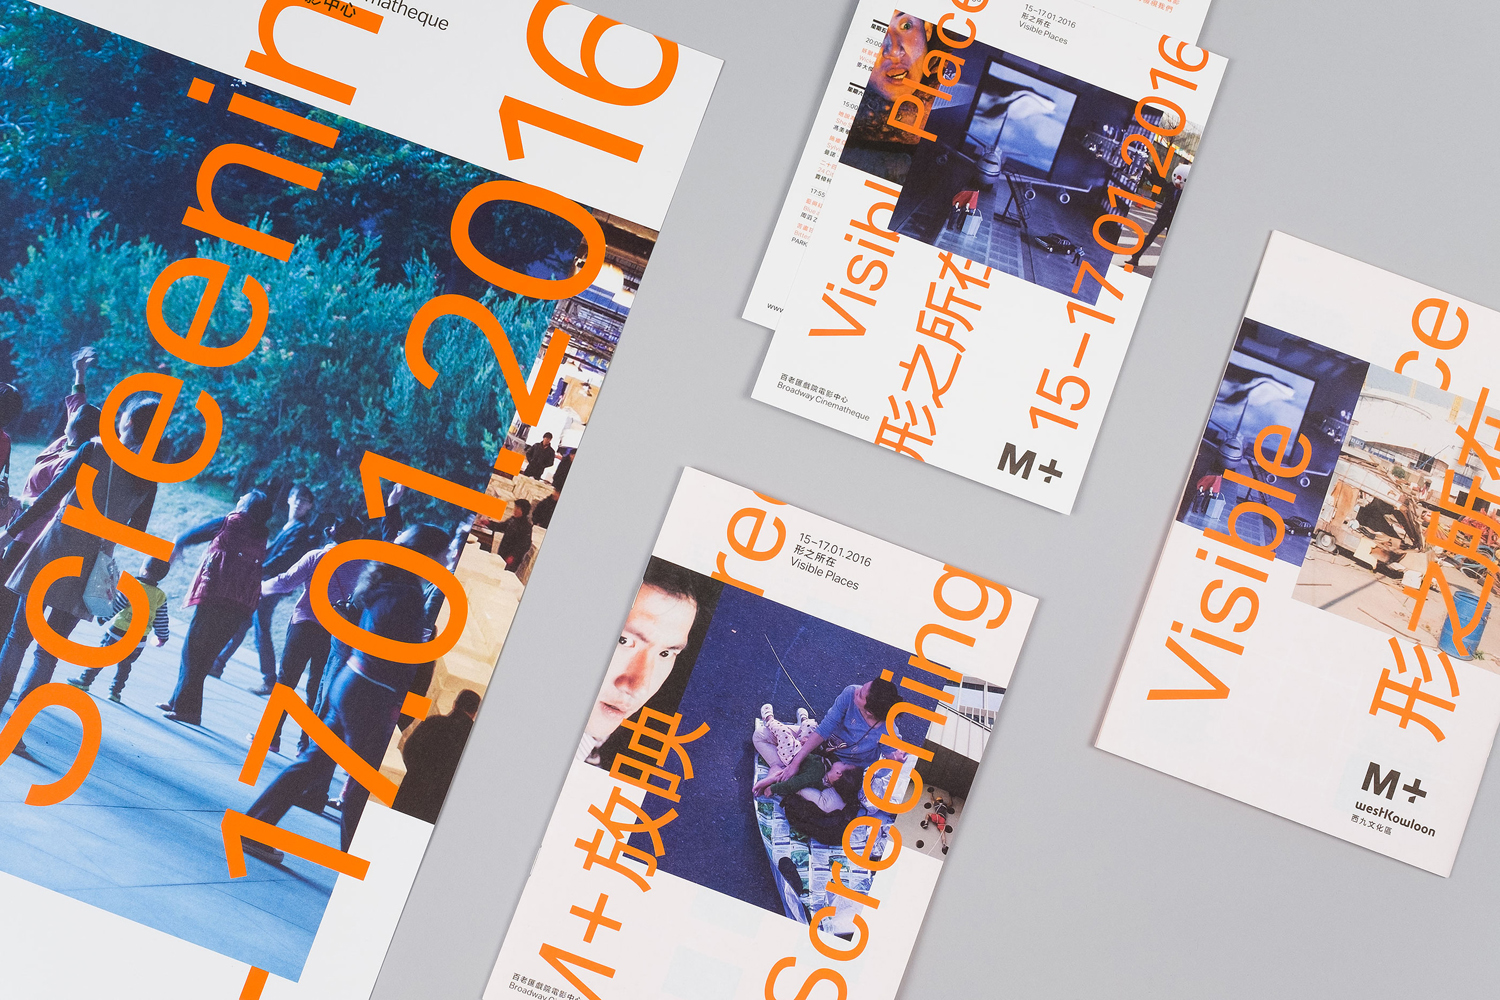 Brand Programme Design Ideas – M+ Screenings by Project Projects